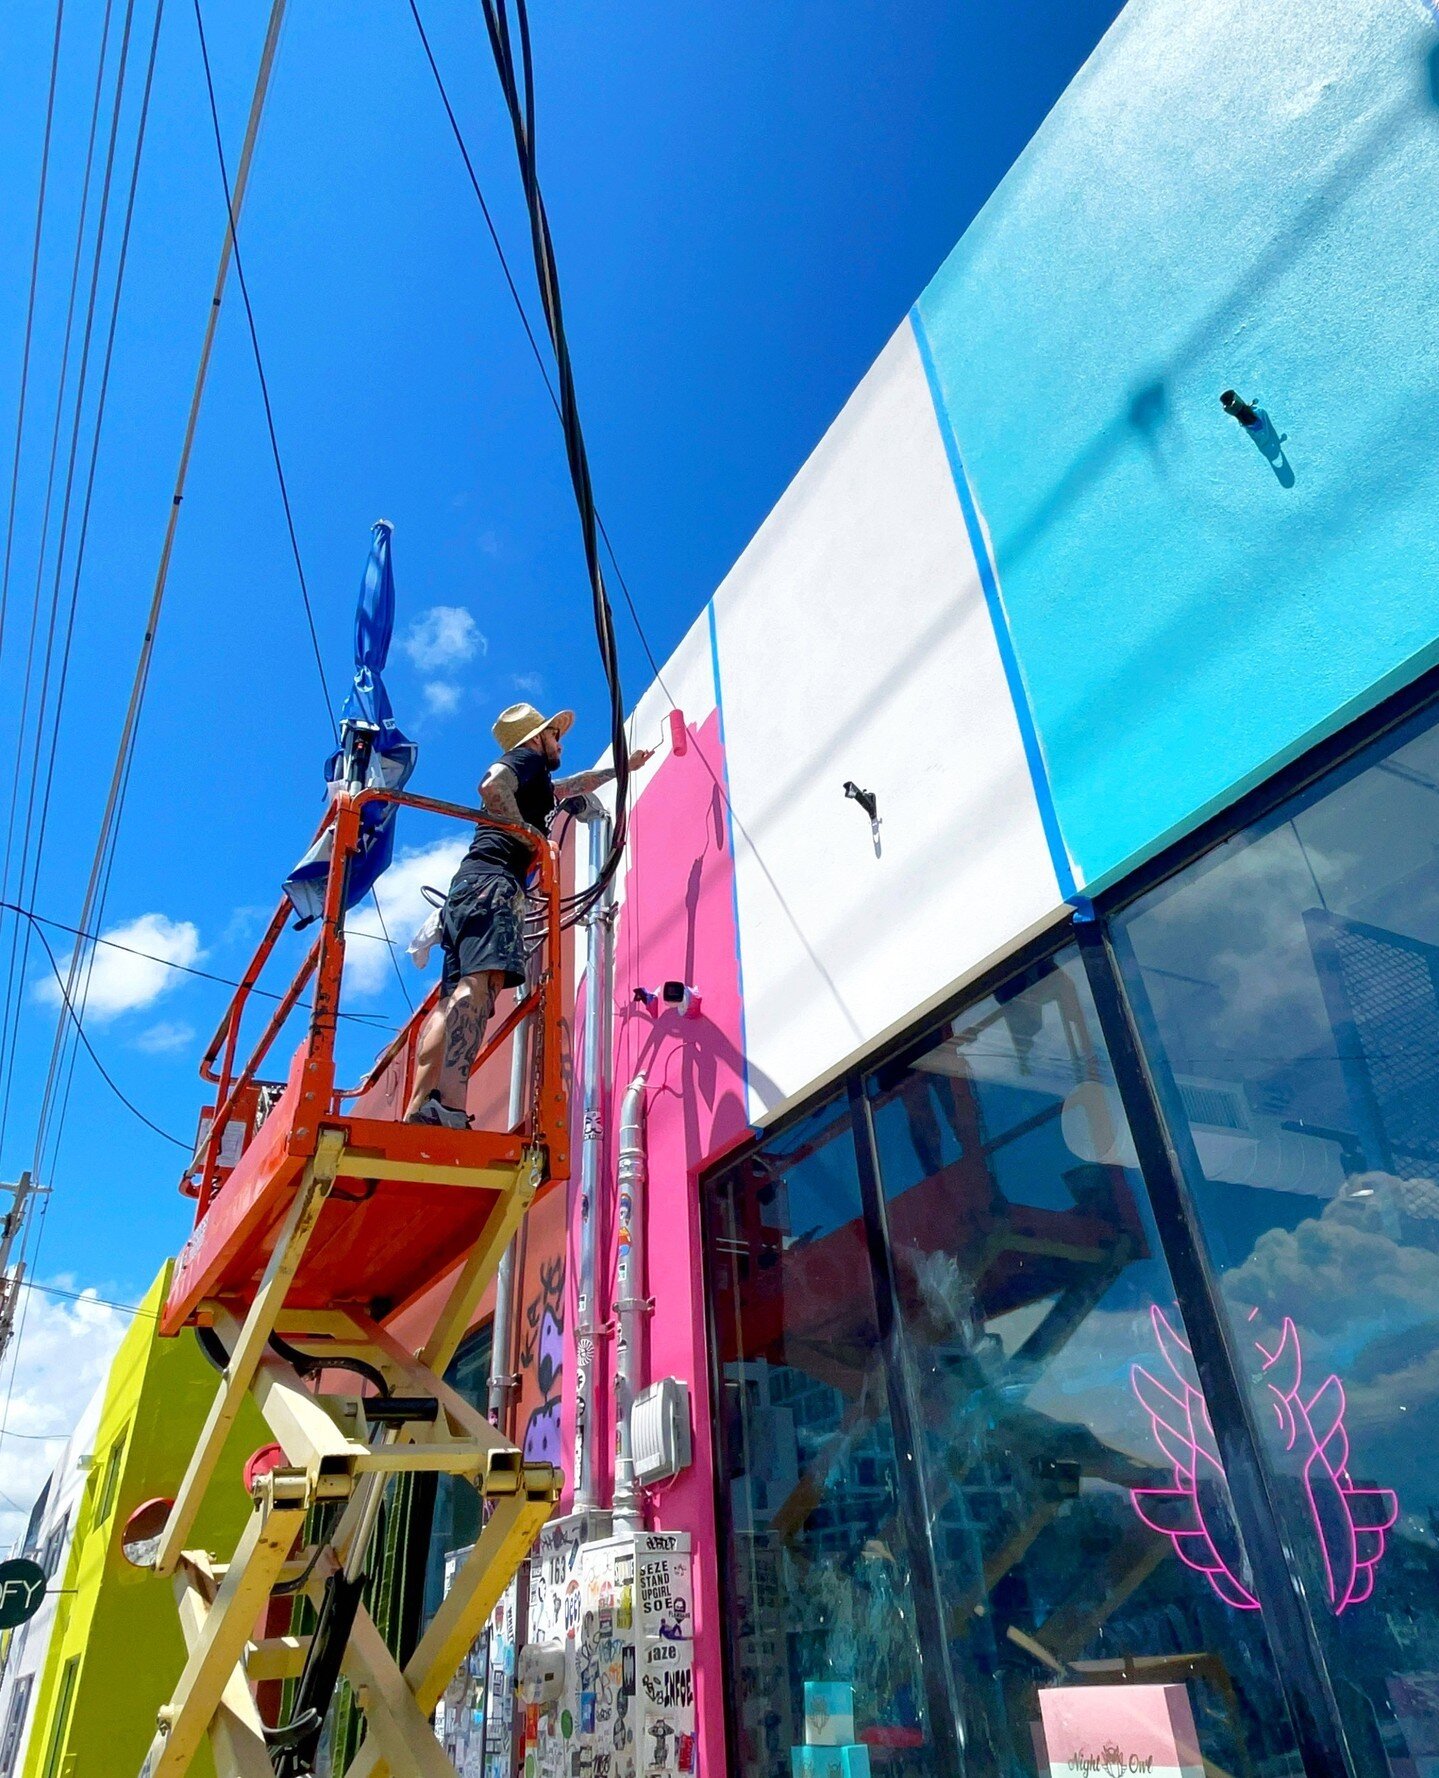 How many challenges can be captured in one photo? We see electrical wires, being up high on a lift and let's not forget the hot Florida sun. #mural #painting #miamimurals #challenges